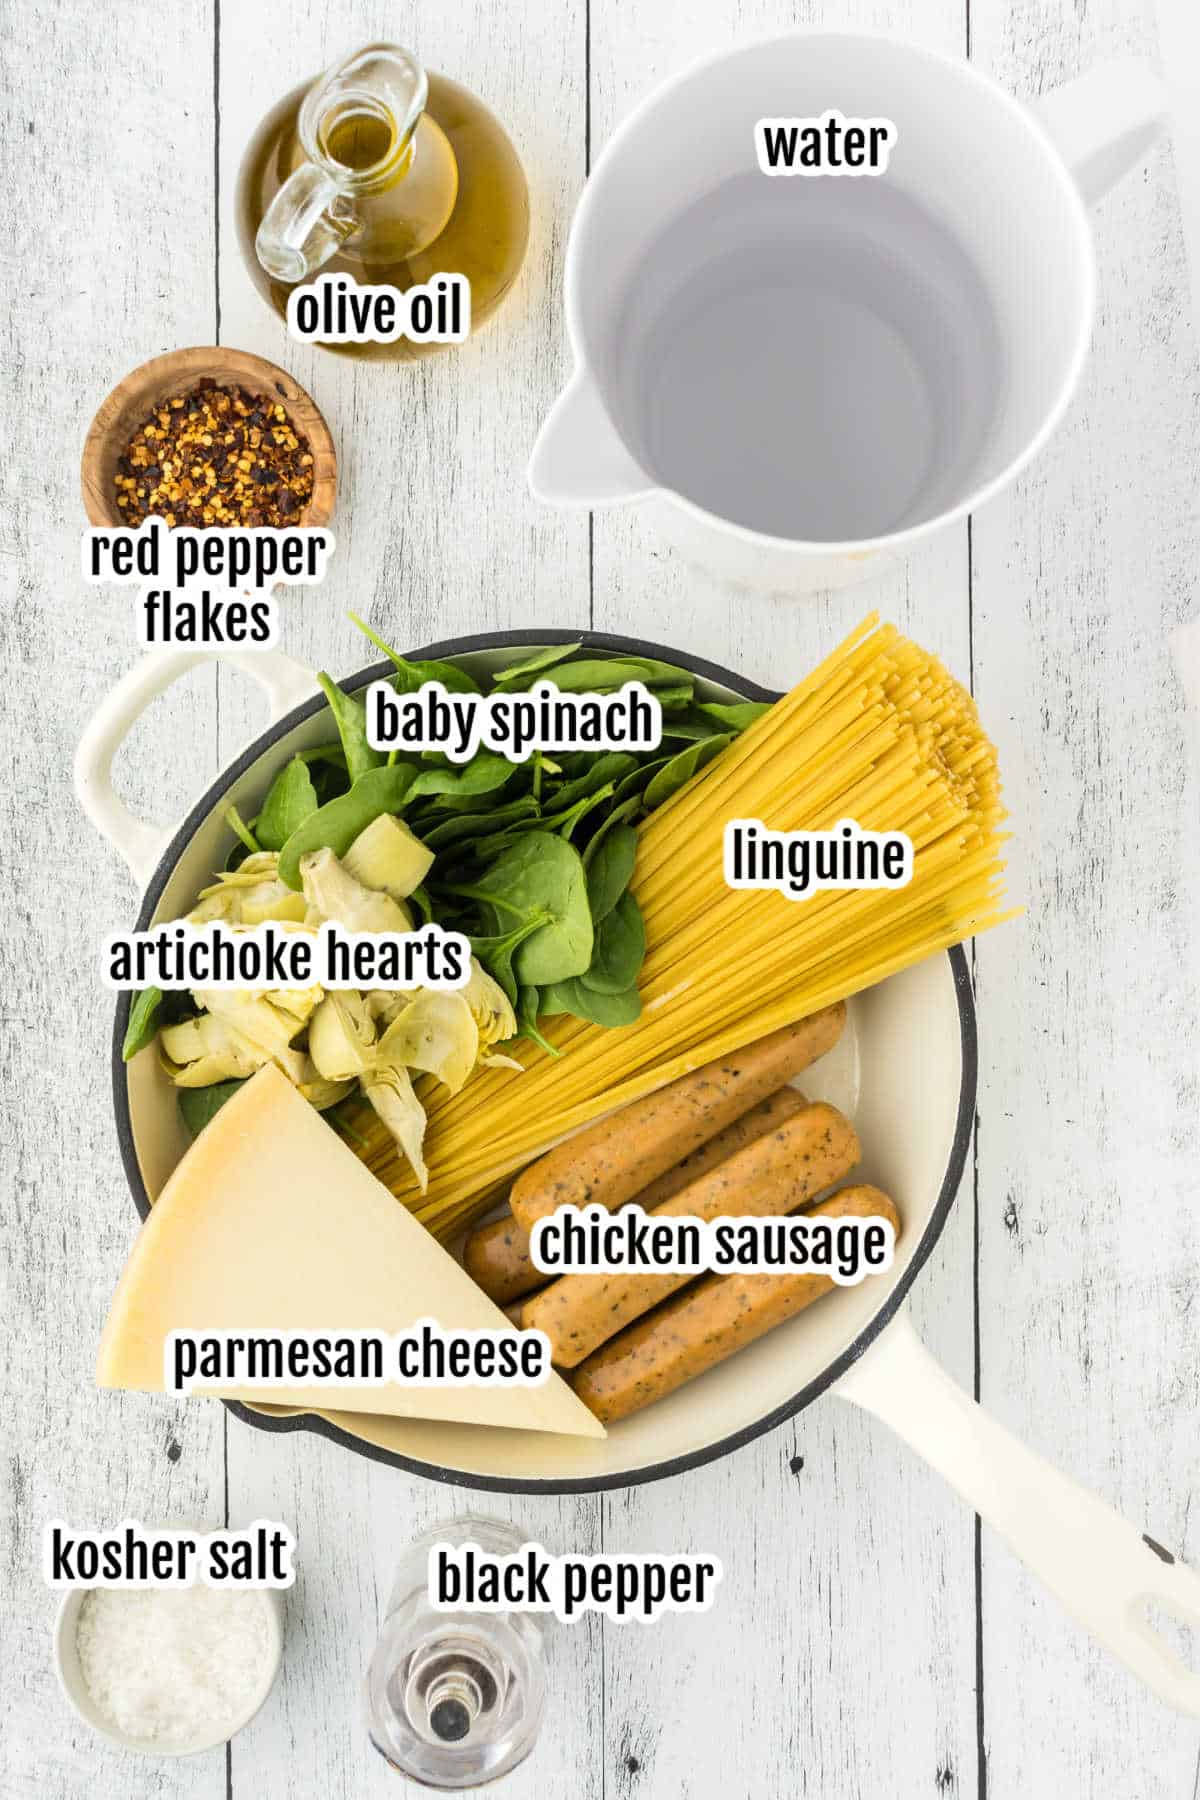 Image of the ingredients needed to make the one-pot spinach artichoke chicken spaghetti recipe. 